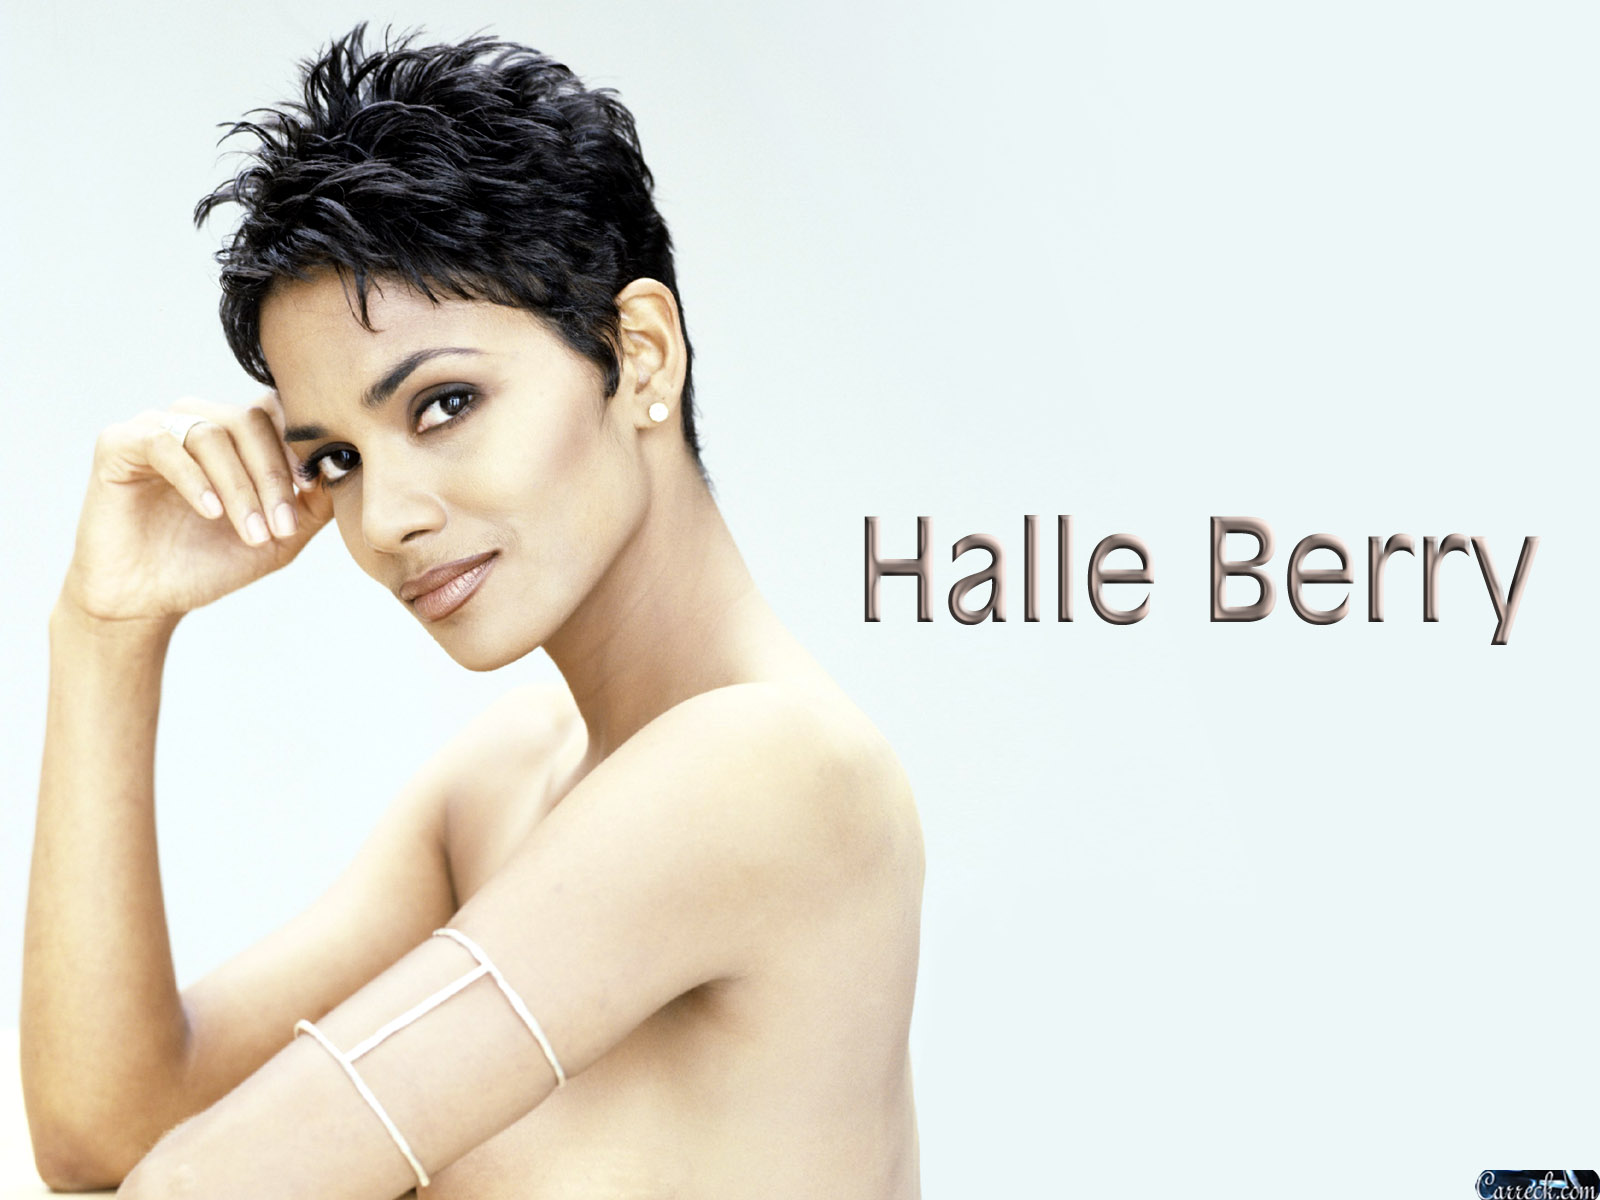 Halle Berry Screensaver Actress Appeared